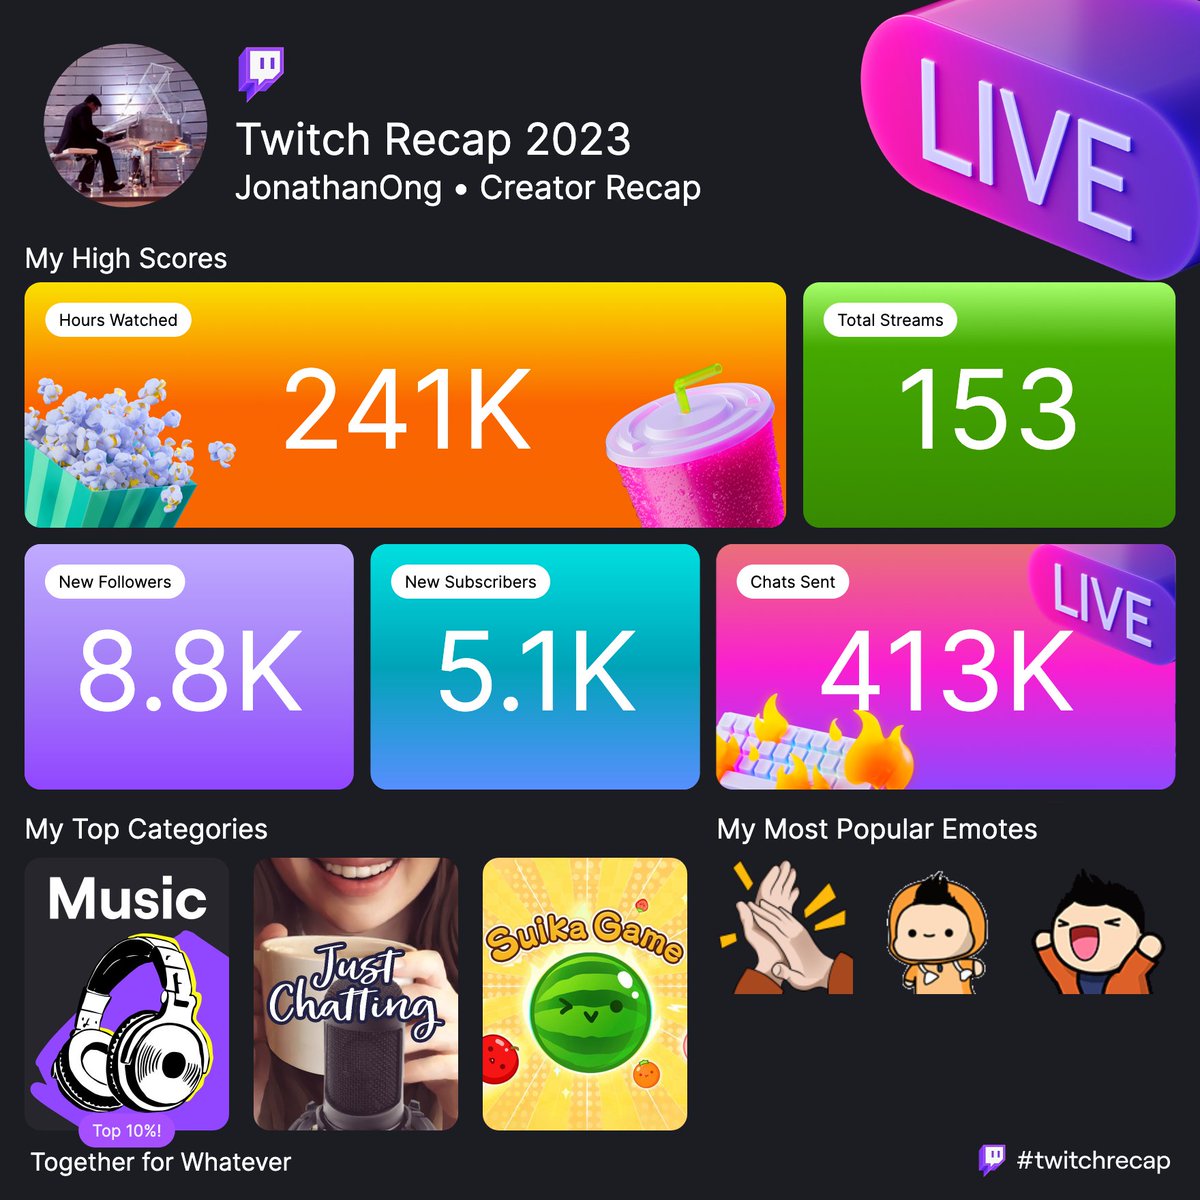 It's been a crazy good year on Twitch. Thanks to everyone who tuned in, and to those amazing people who pitched in one way or another to support the show! Come join us live now on twitch as we #twitchrecap the best requests of 2023 !!